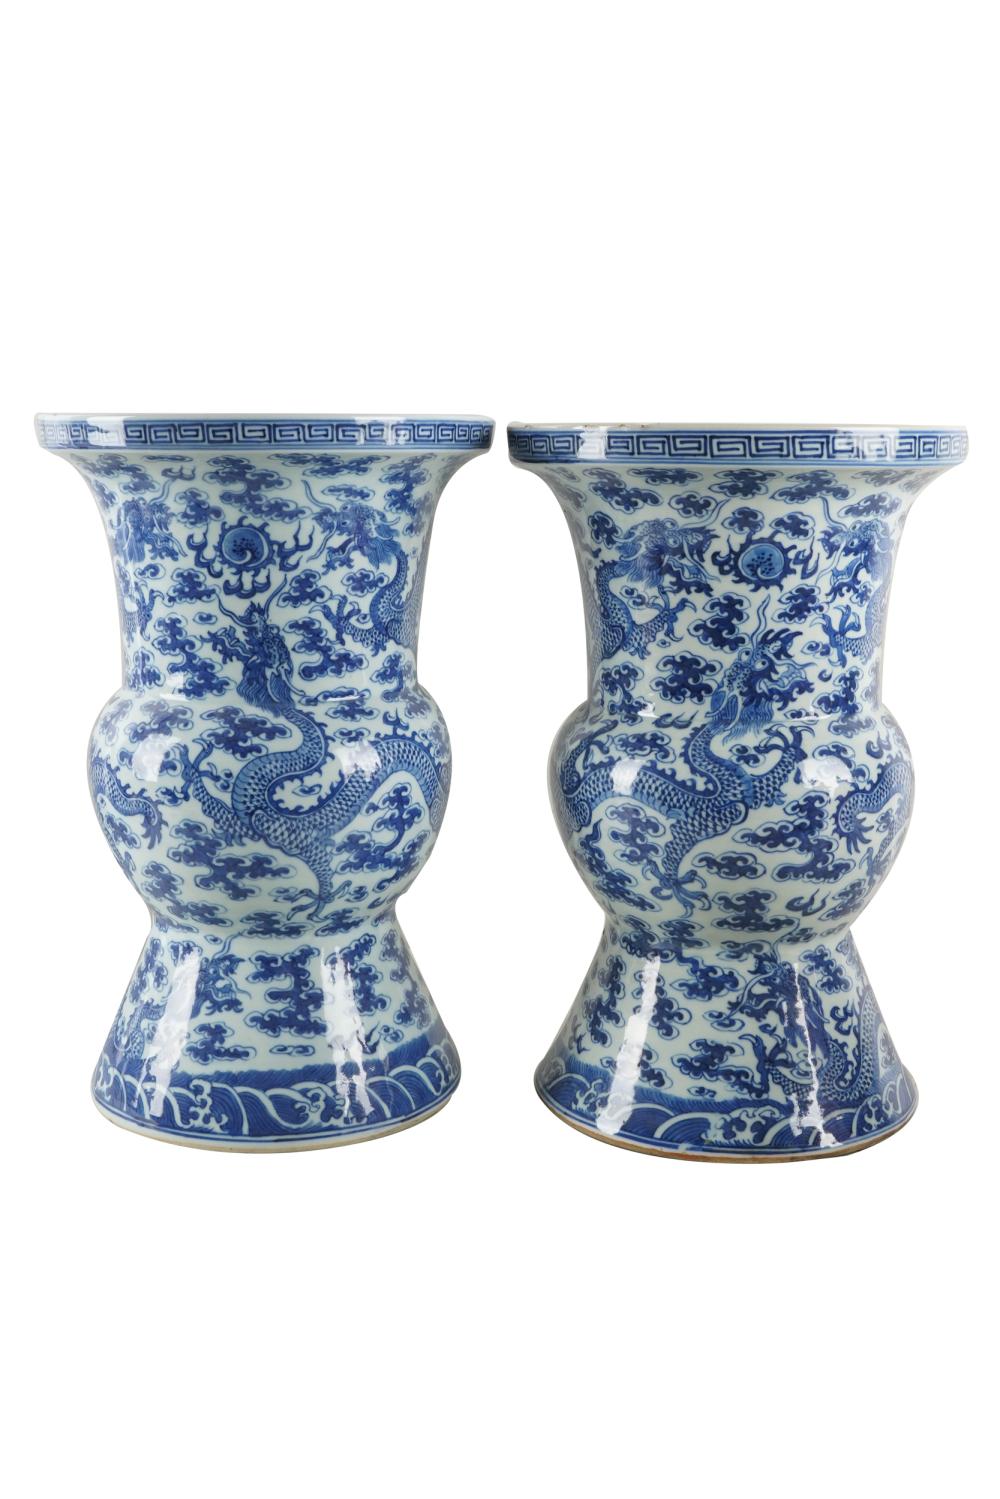 PAIR OF CHINESE BLUE WHITE PORCELAIN 33435b